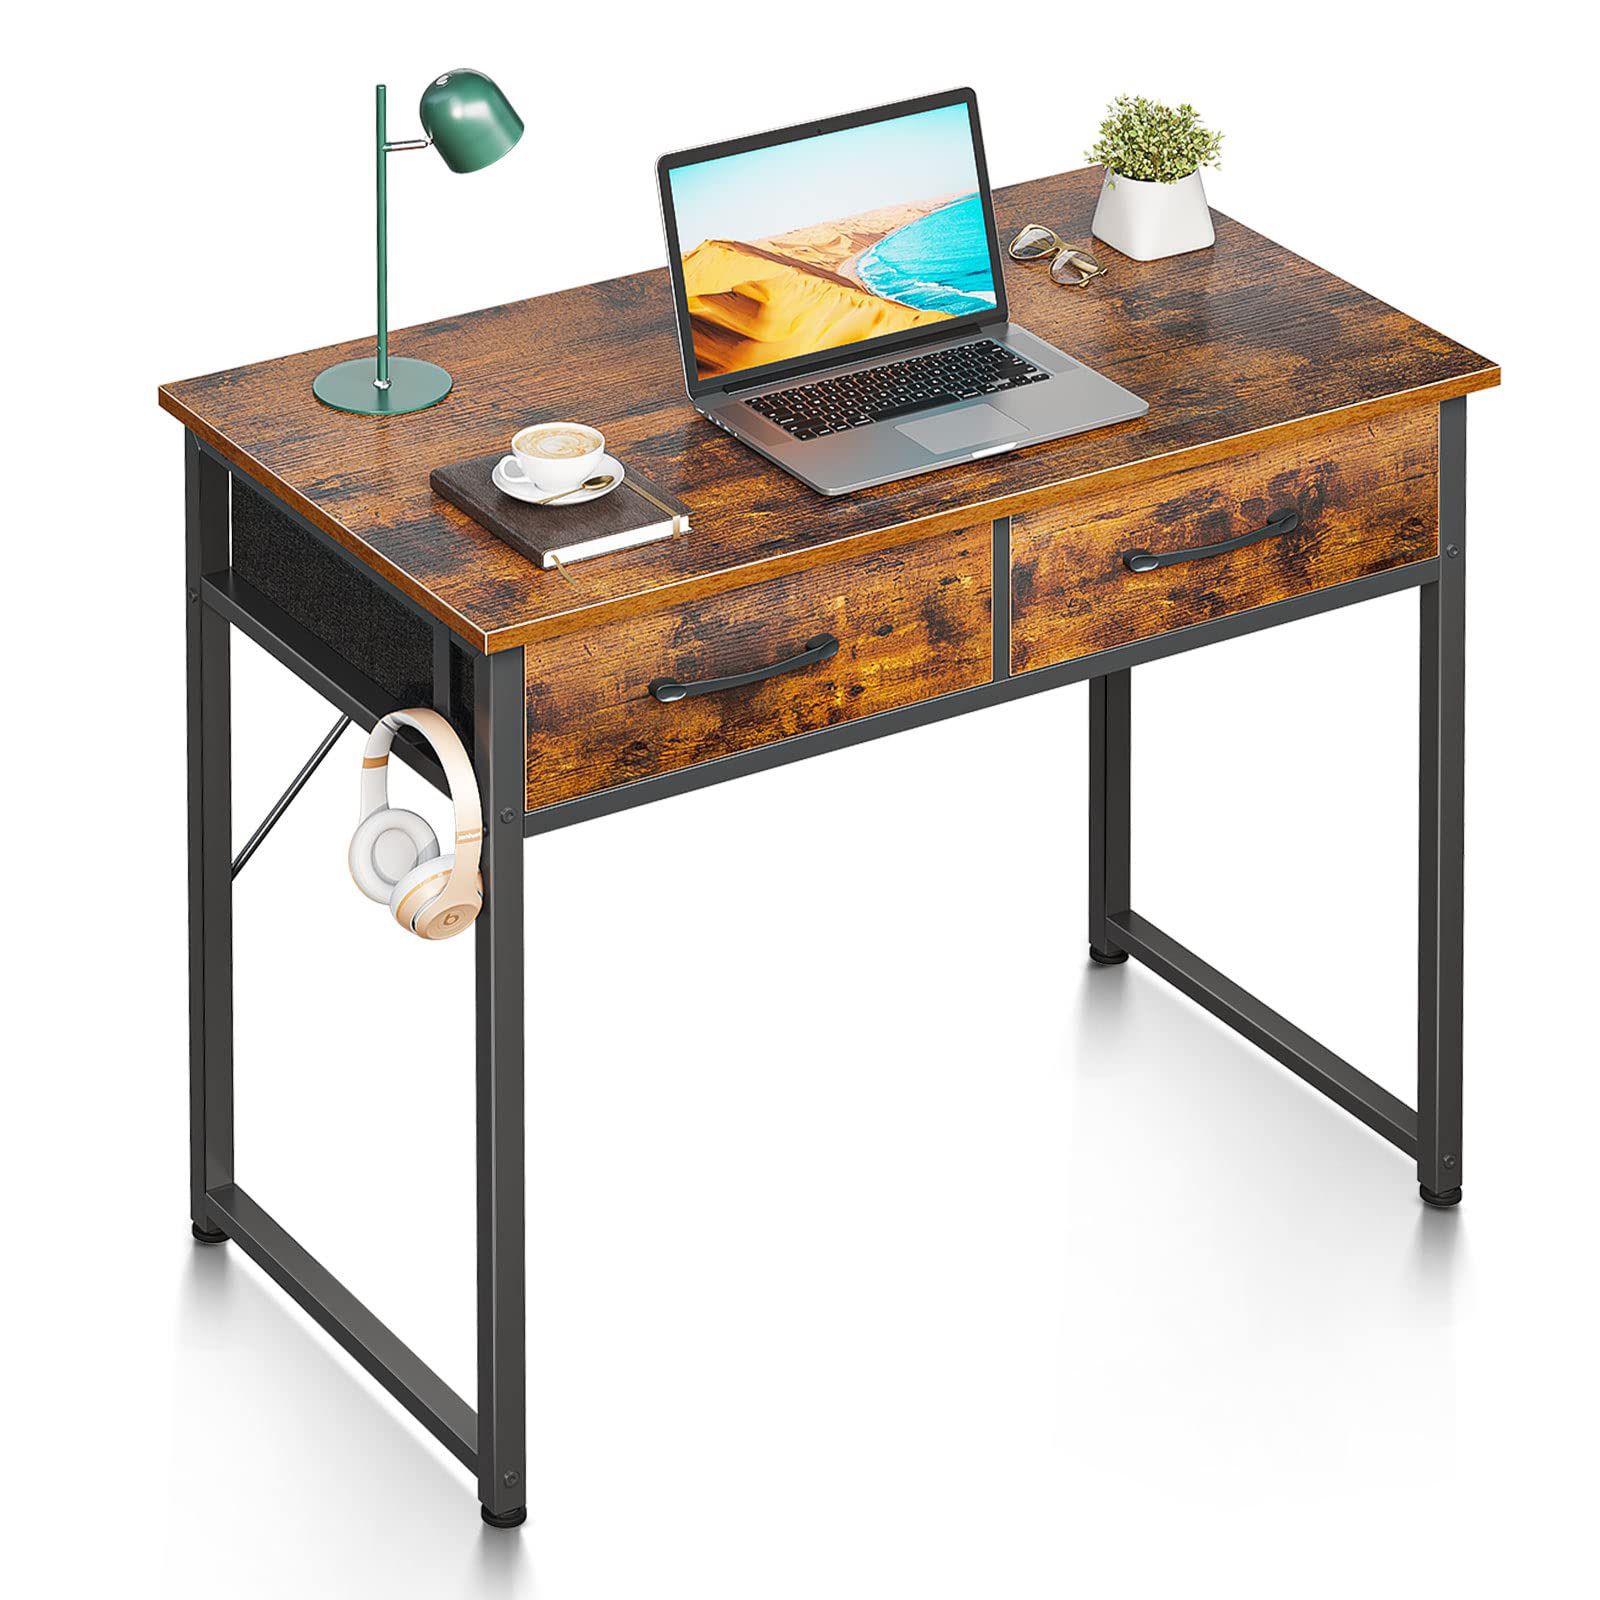 Compact Elegance: ODK Vintage Small Desk with Storage